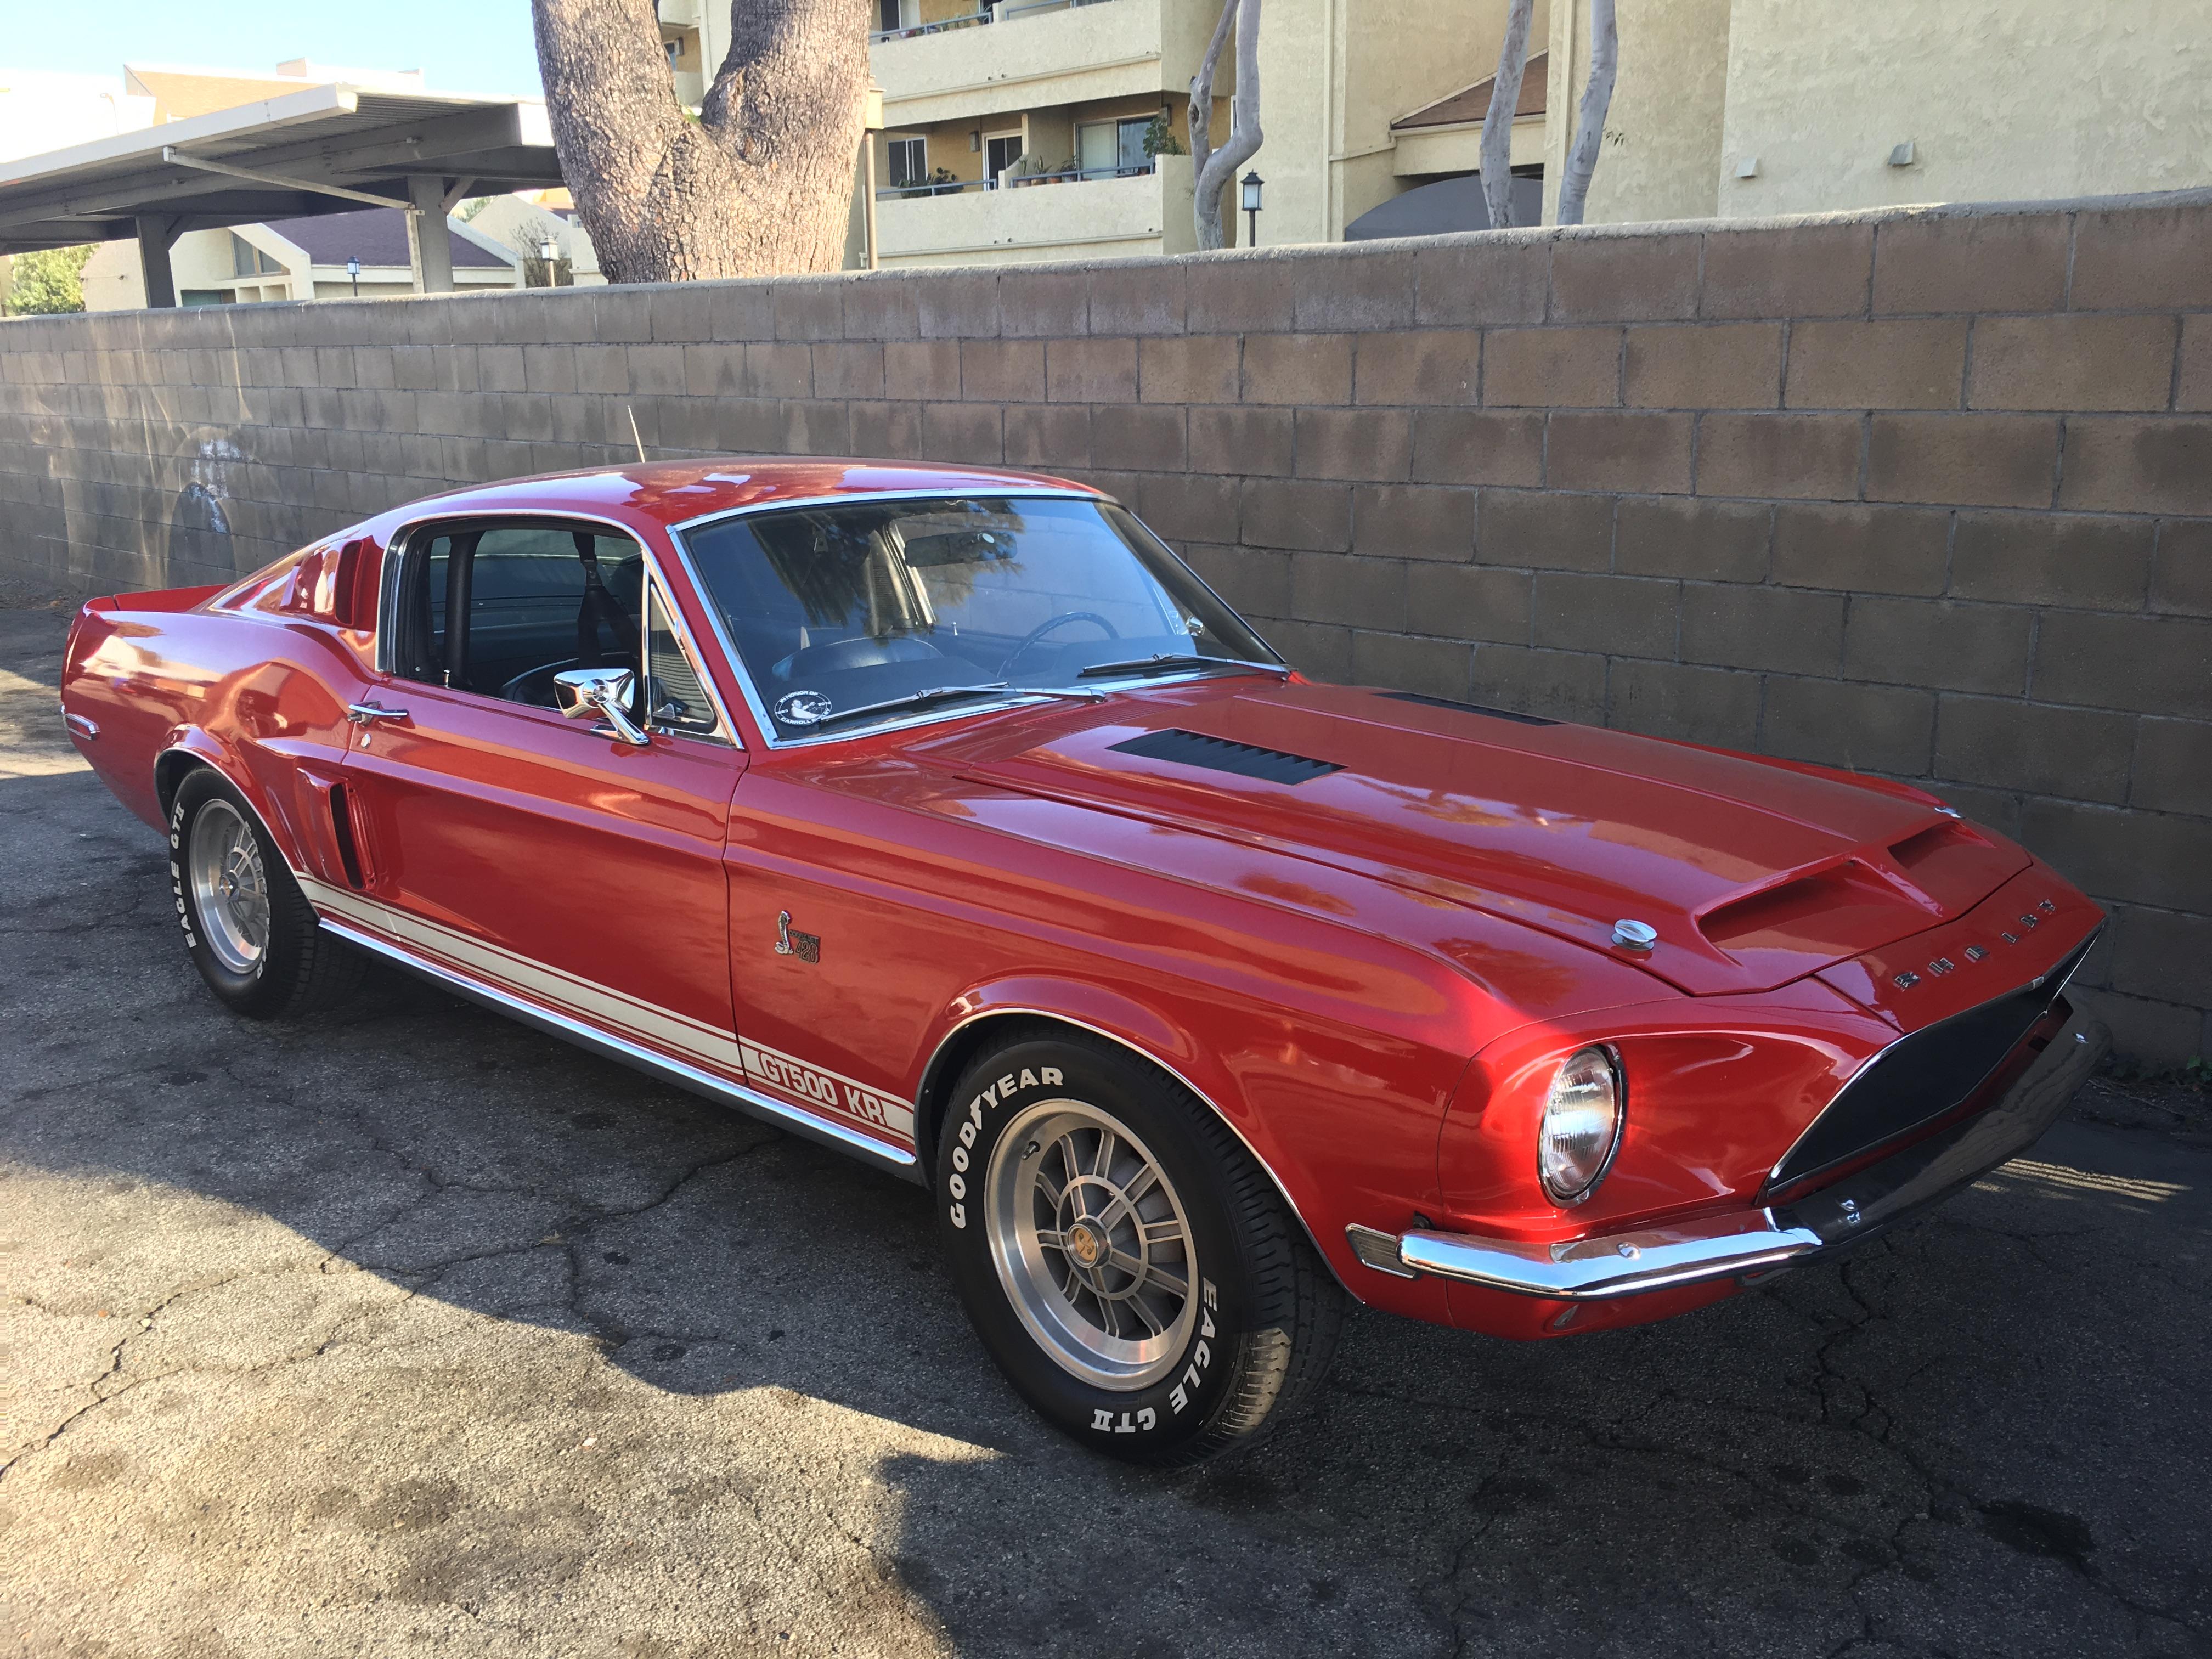 Car Fastback Muscle Car Red Car Shelby Cobra Gt500 King Of The Road 4032x3024